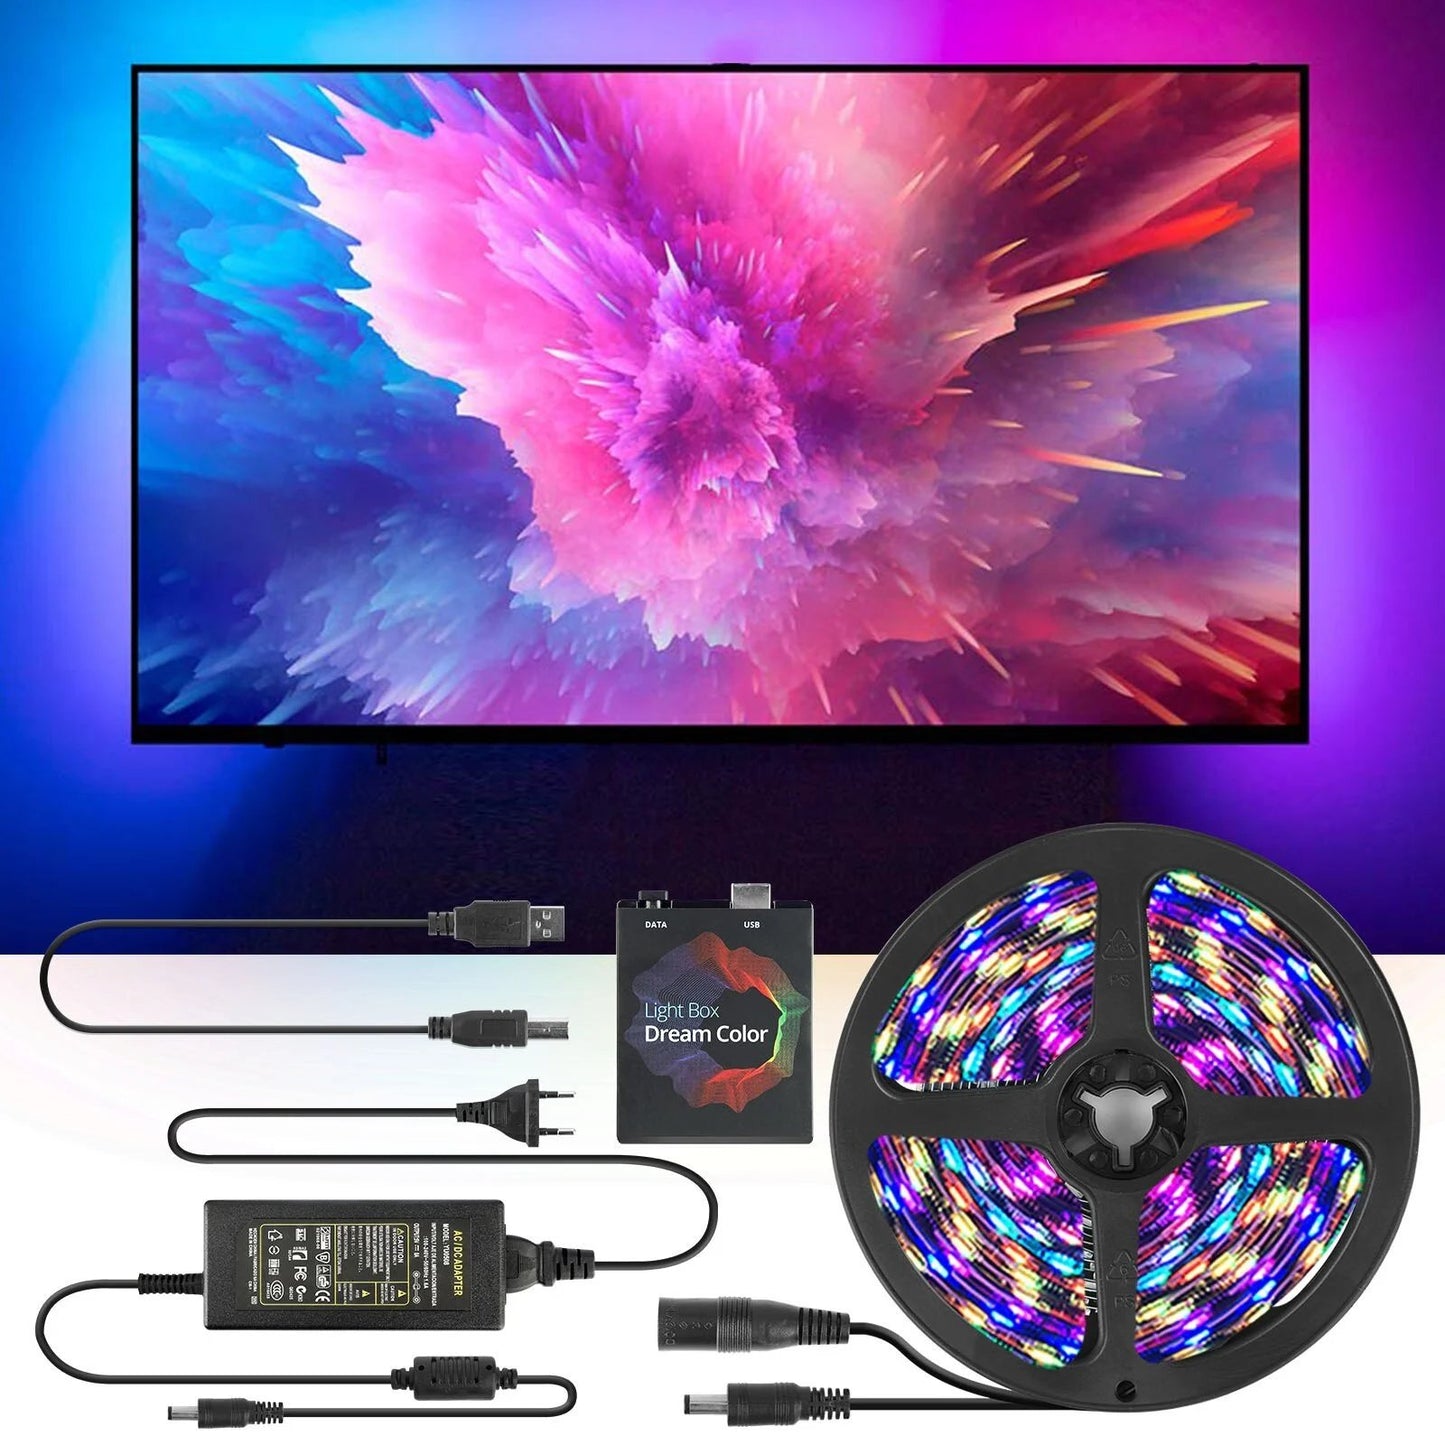 🔥Limited Time 50% Off! 🎁Ambilight TV PC Dream Screen USB LED Strip